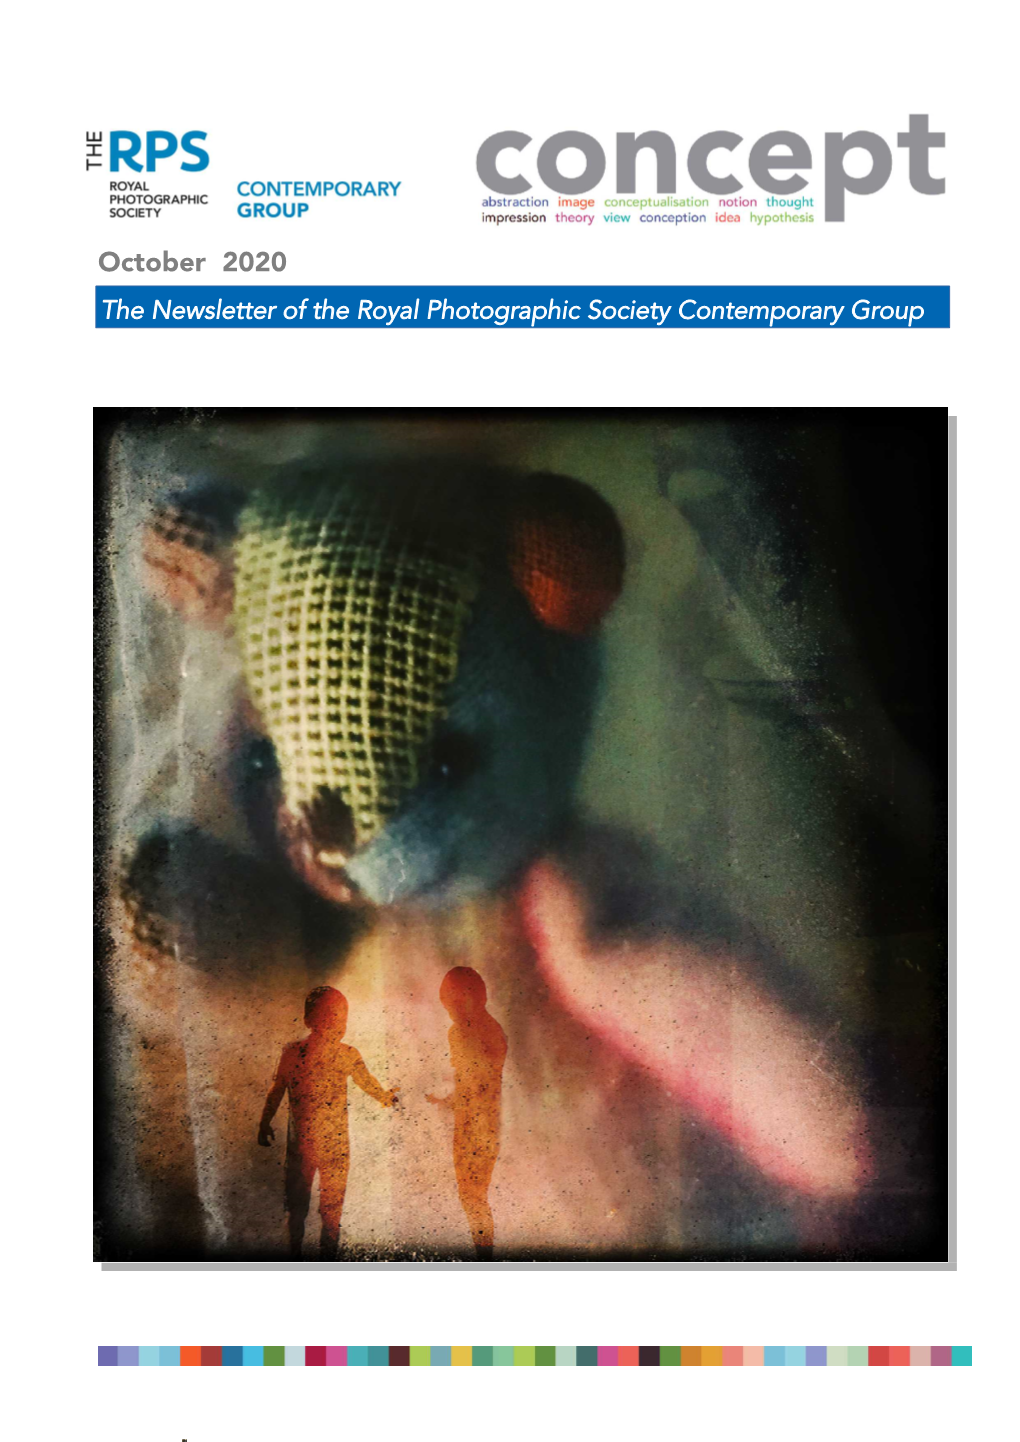 October 2020 the Newsletter of the Royal Photographic Society Contemporary Group in This Issue